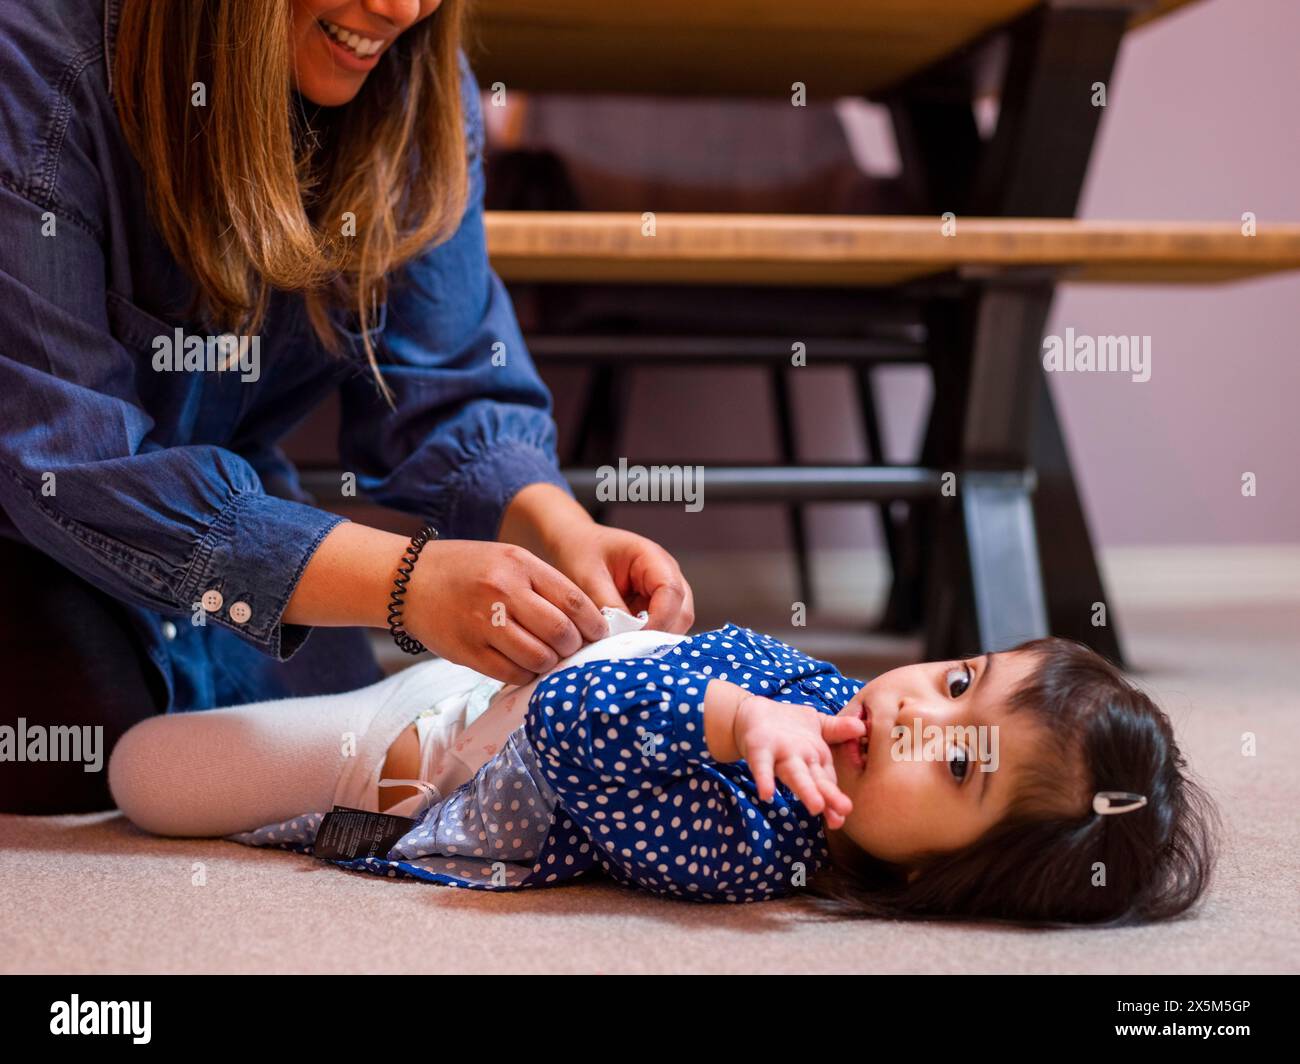 Mother caring for daughter with feeding tube Stock Photo